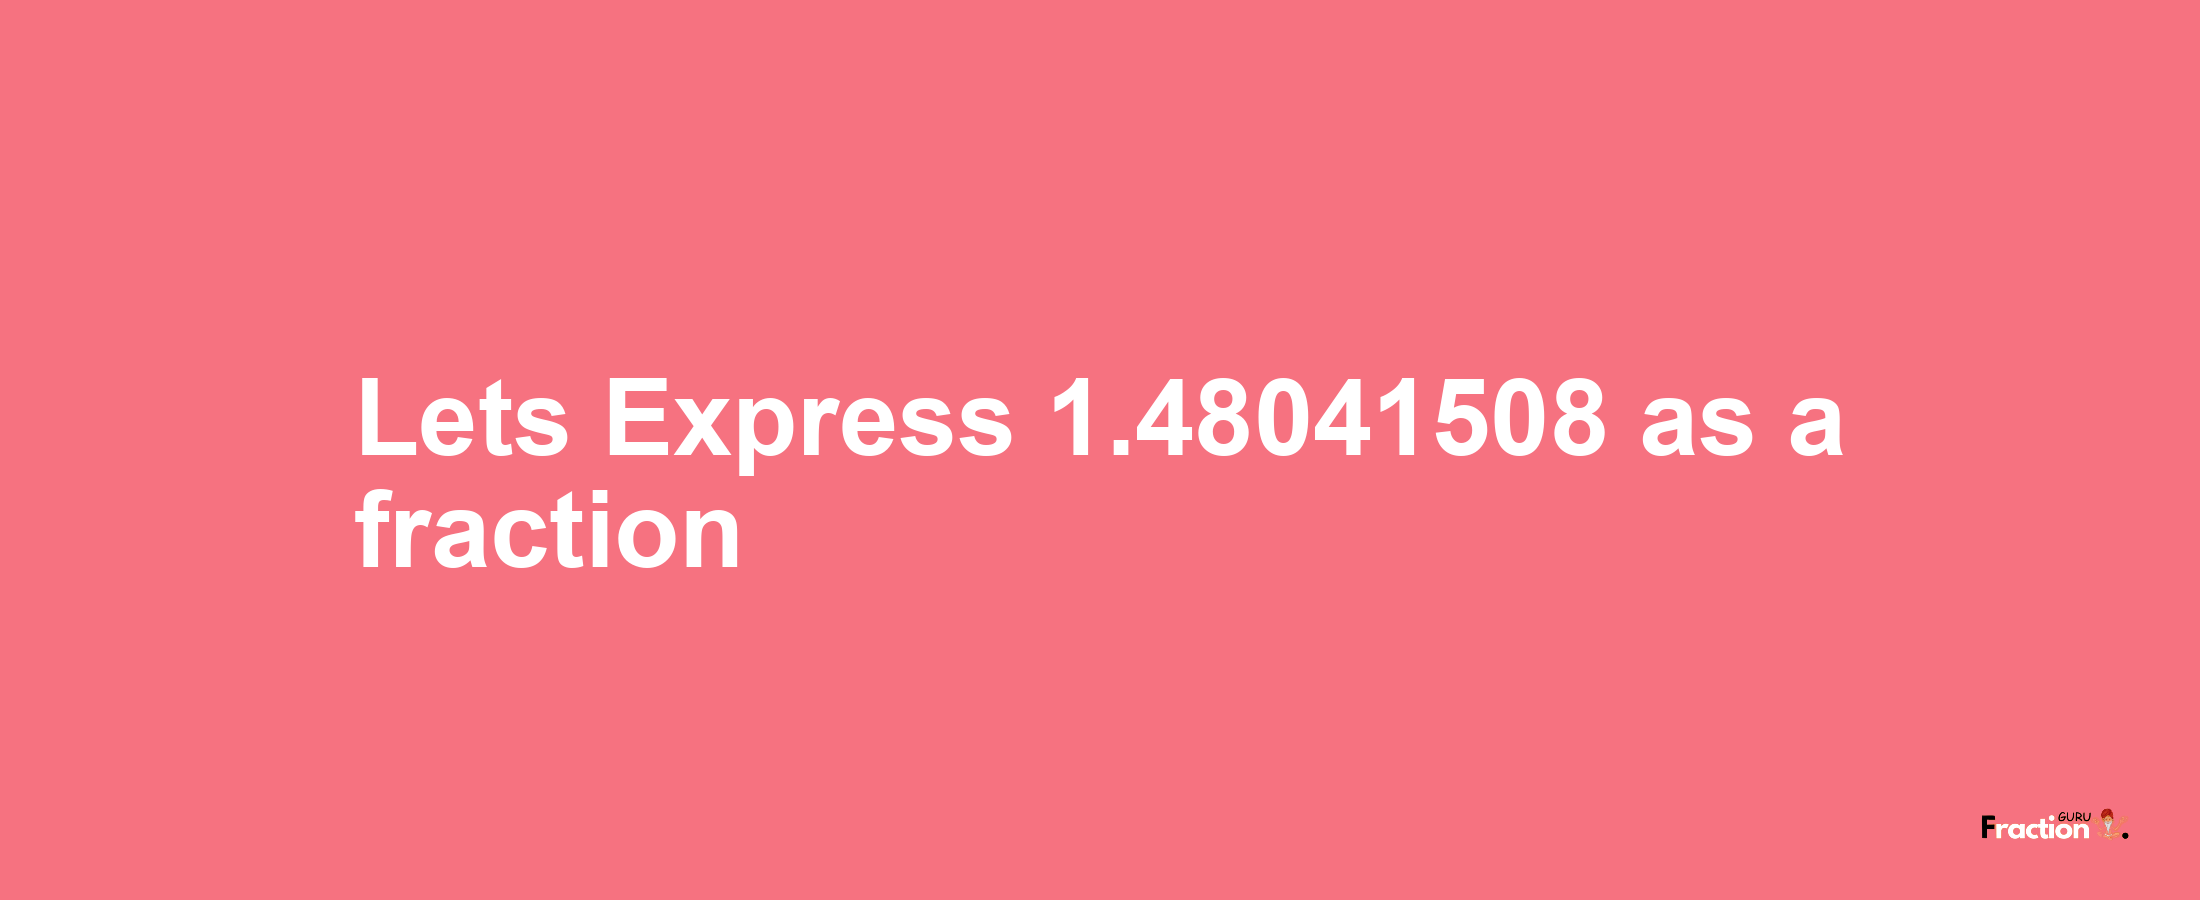 Lets Express 1.48041508 as afraction